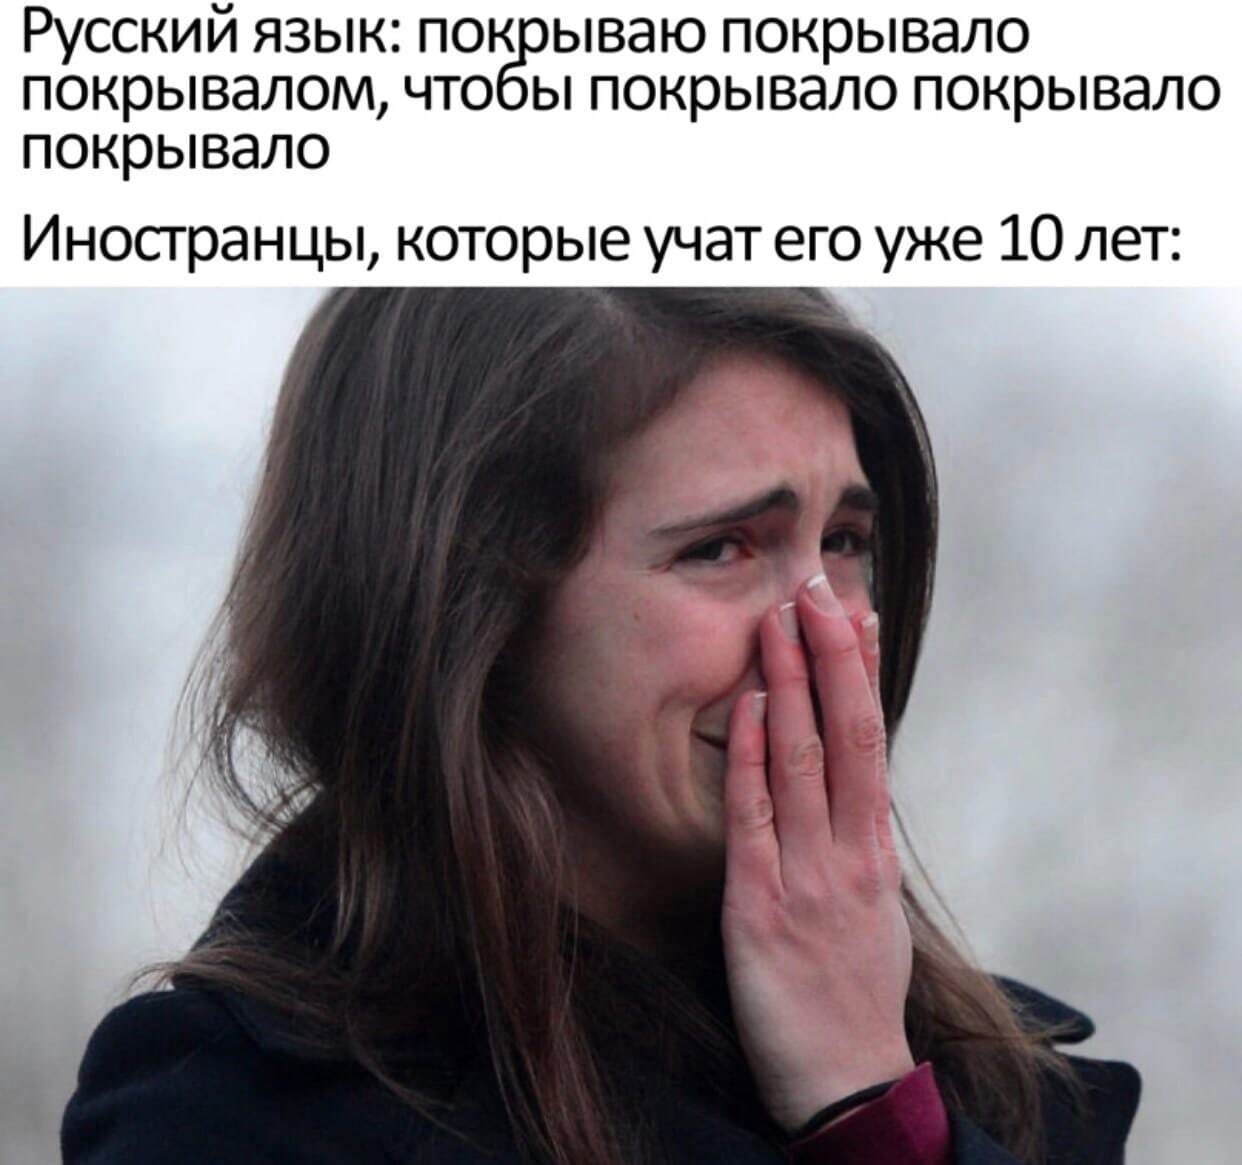 It's probably hard for them - Humor, Memes, Picture with text, Vital, Russian language